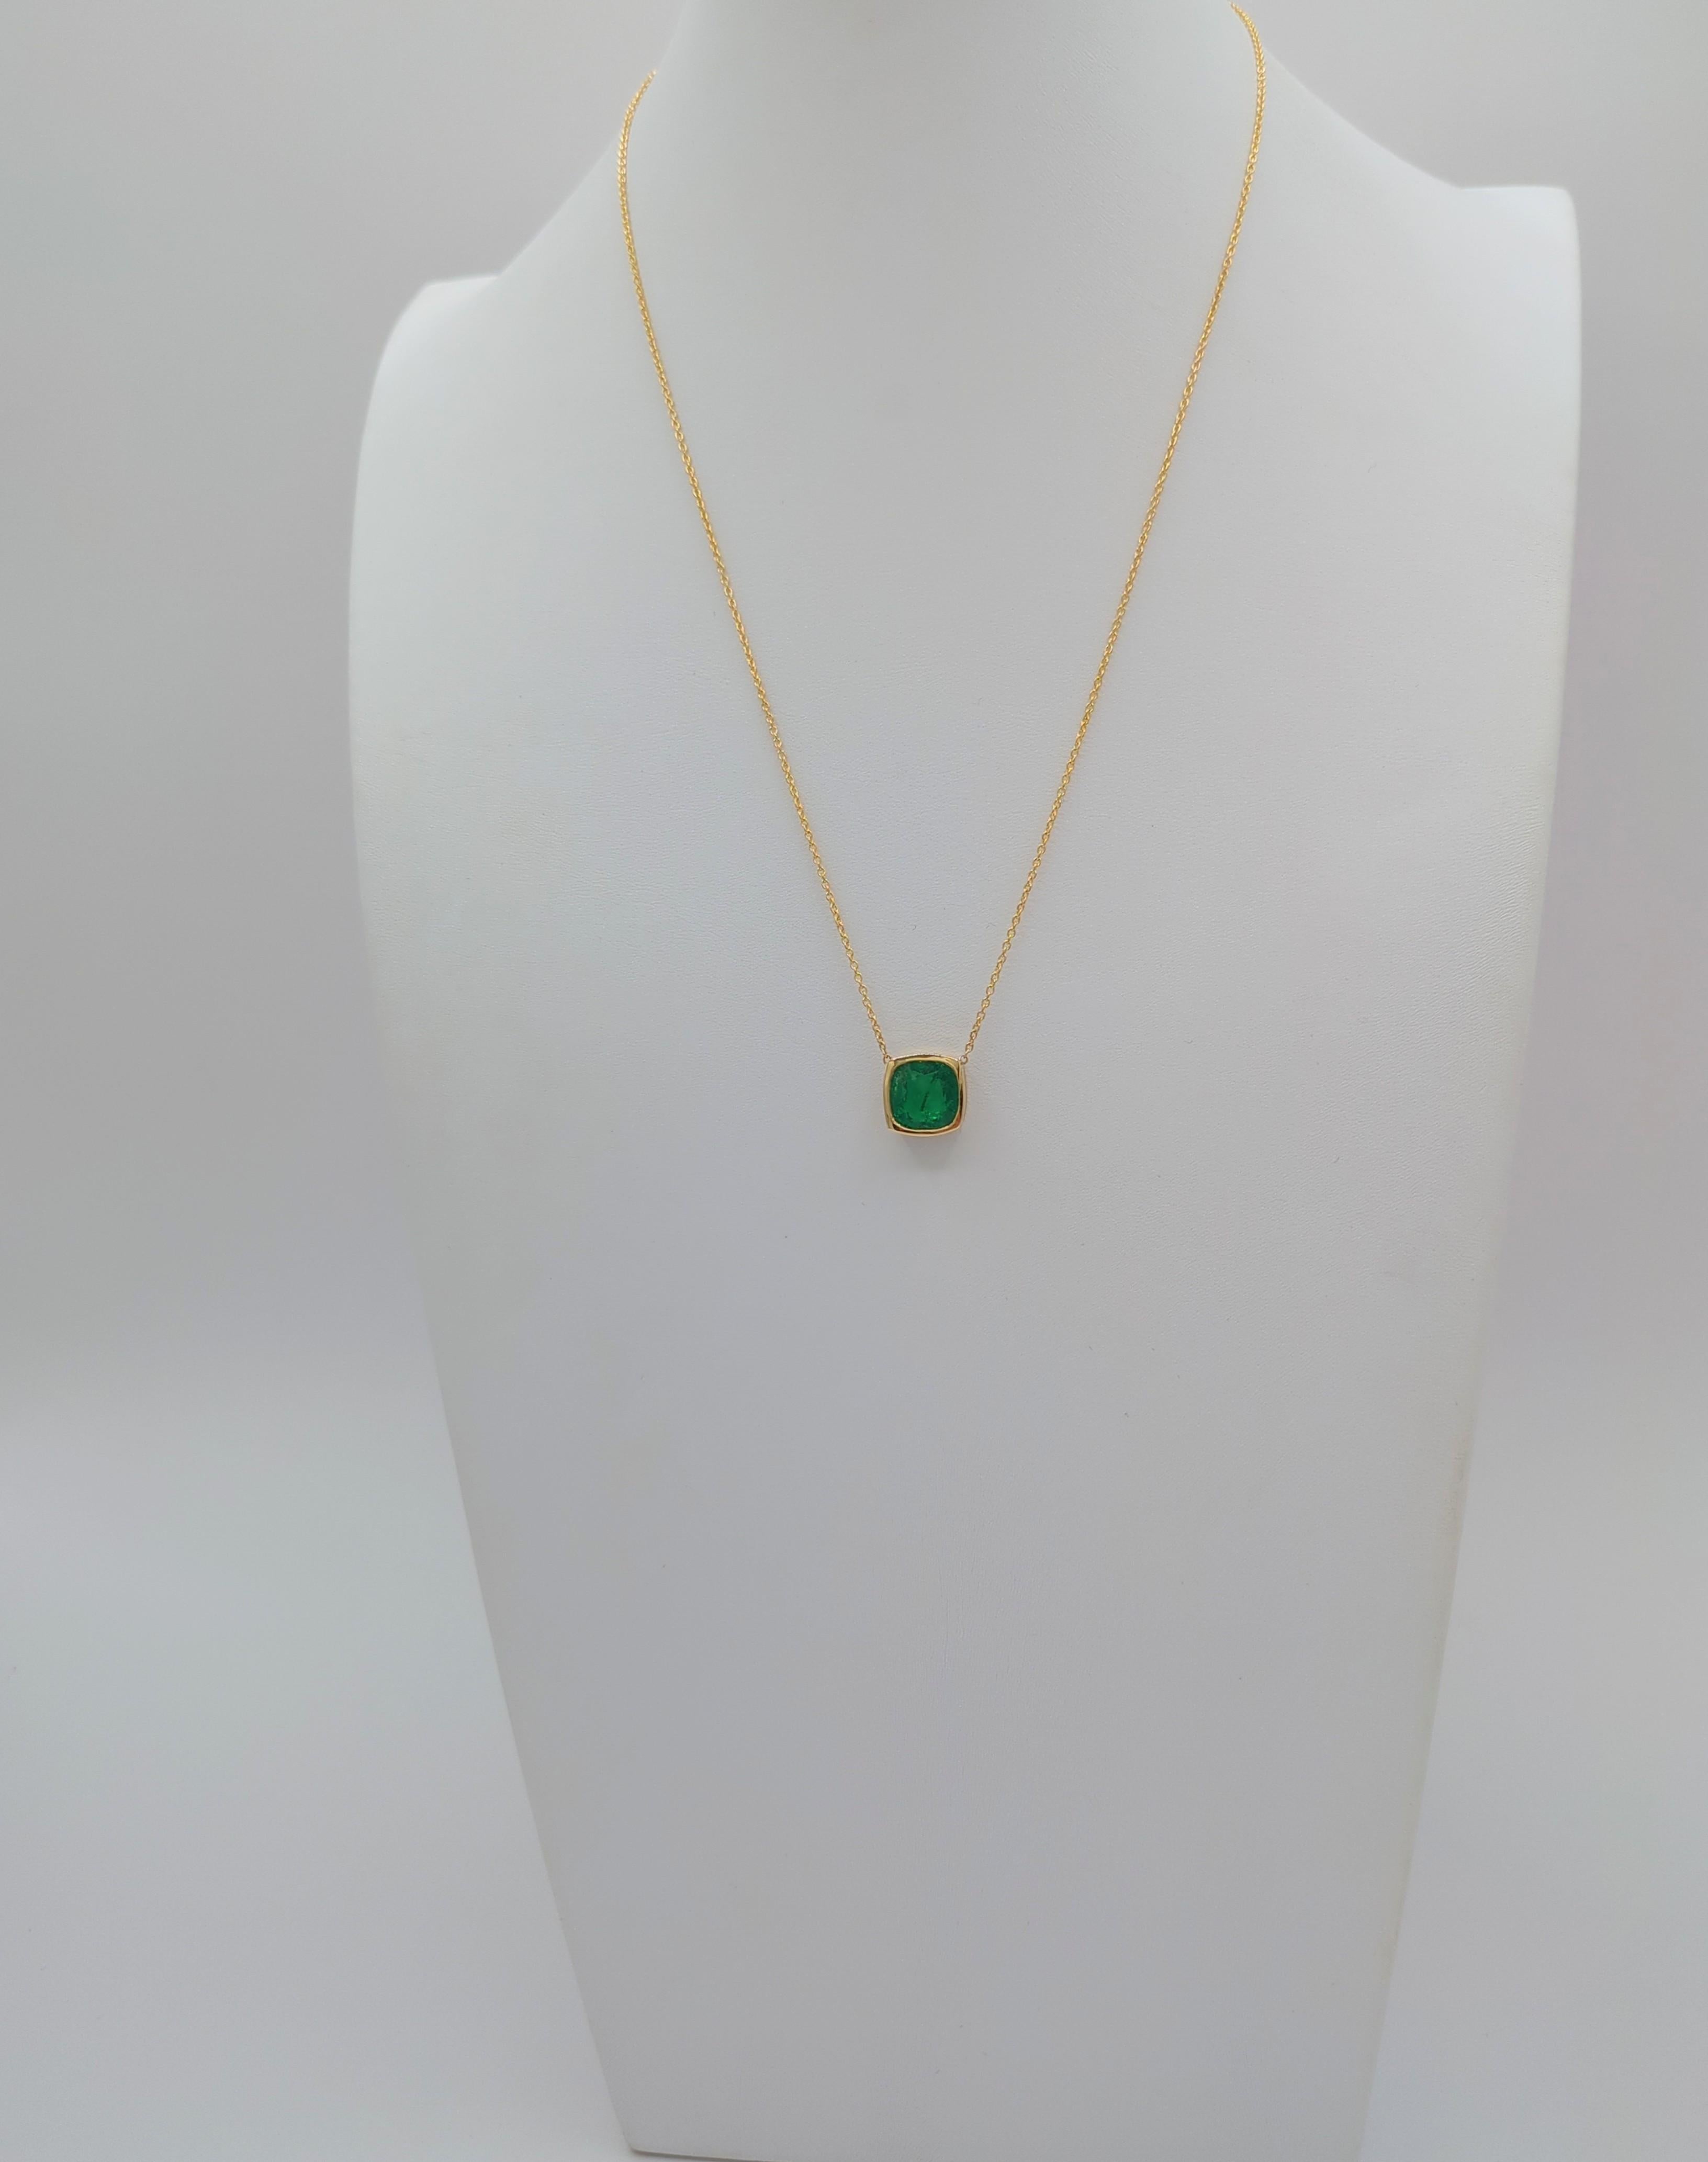 Women's or Men's Emerald Cushion Bezel Pendant Necklace in 18K Yellow Gold For Sale